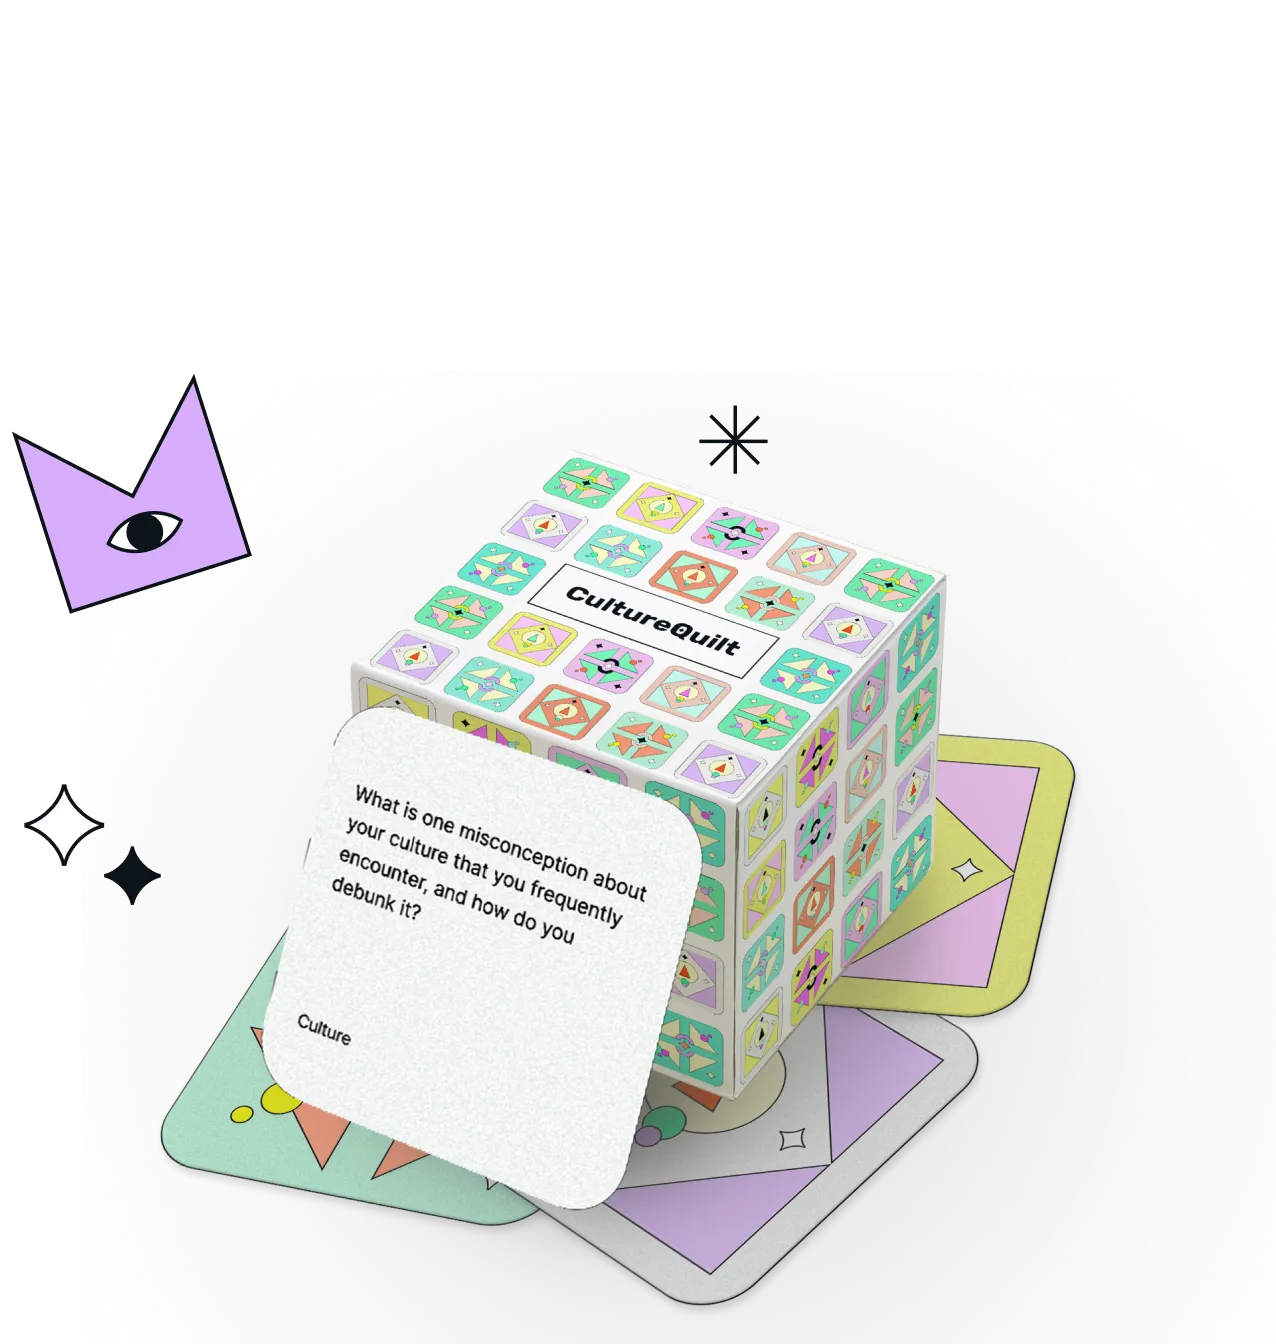 Mockup of the final product design showing the cards and their box.